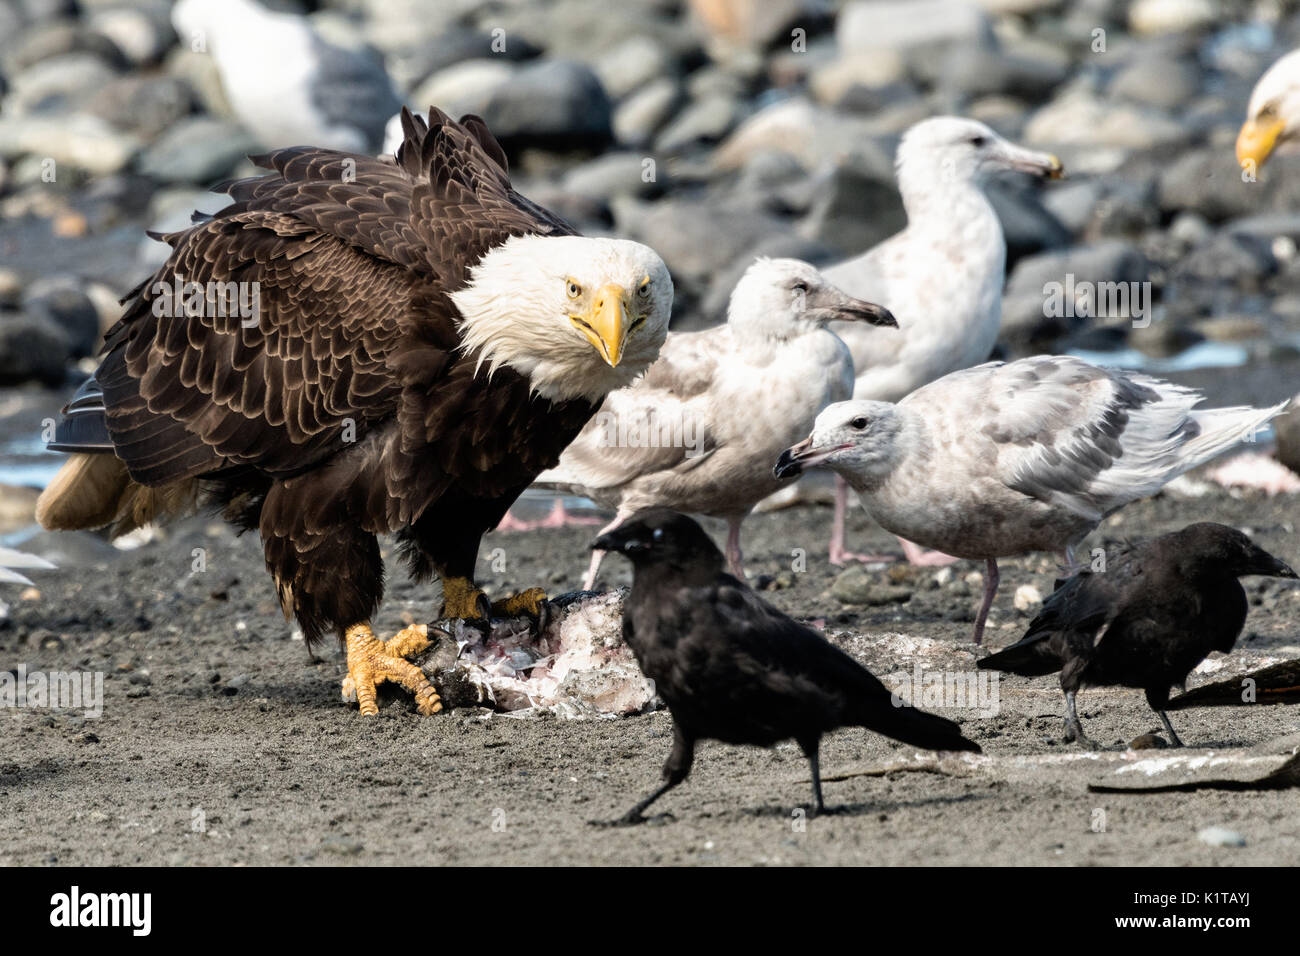 An adult bald eagle threatens a raven that got too close to fish